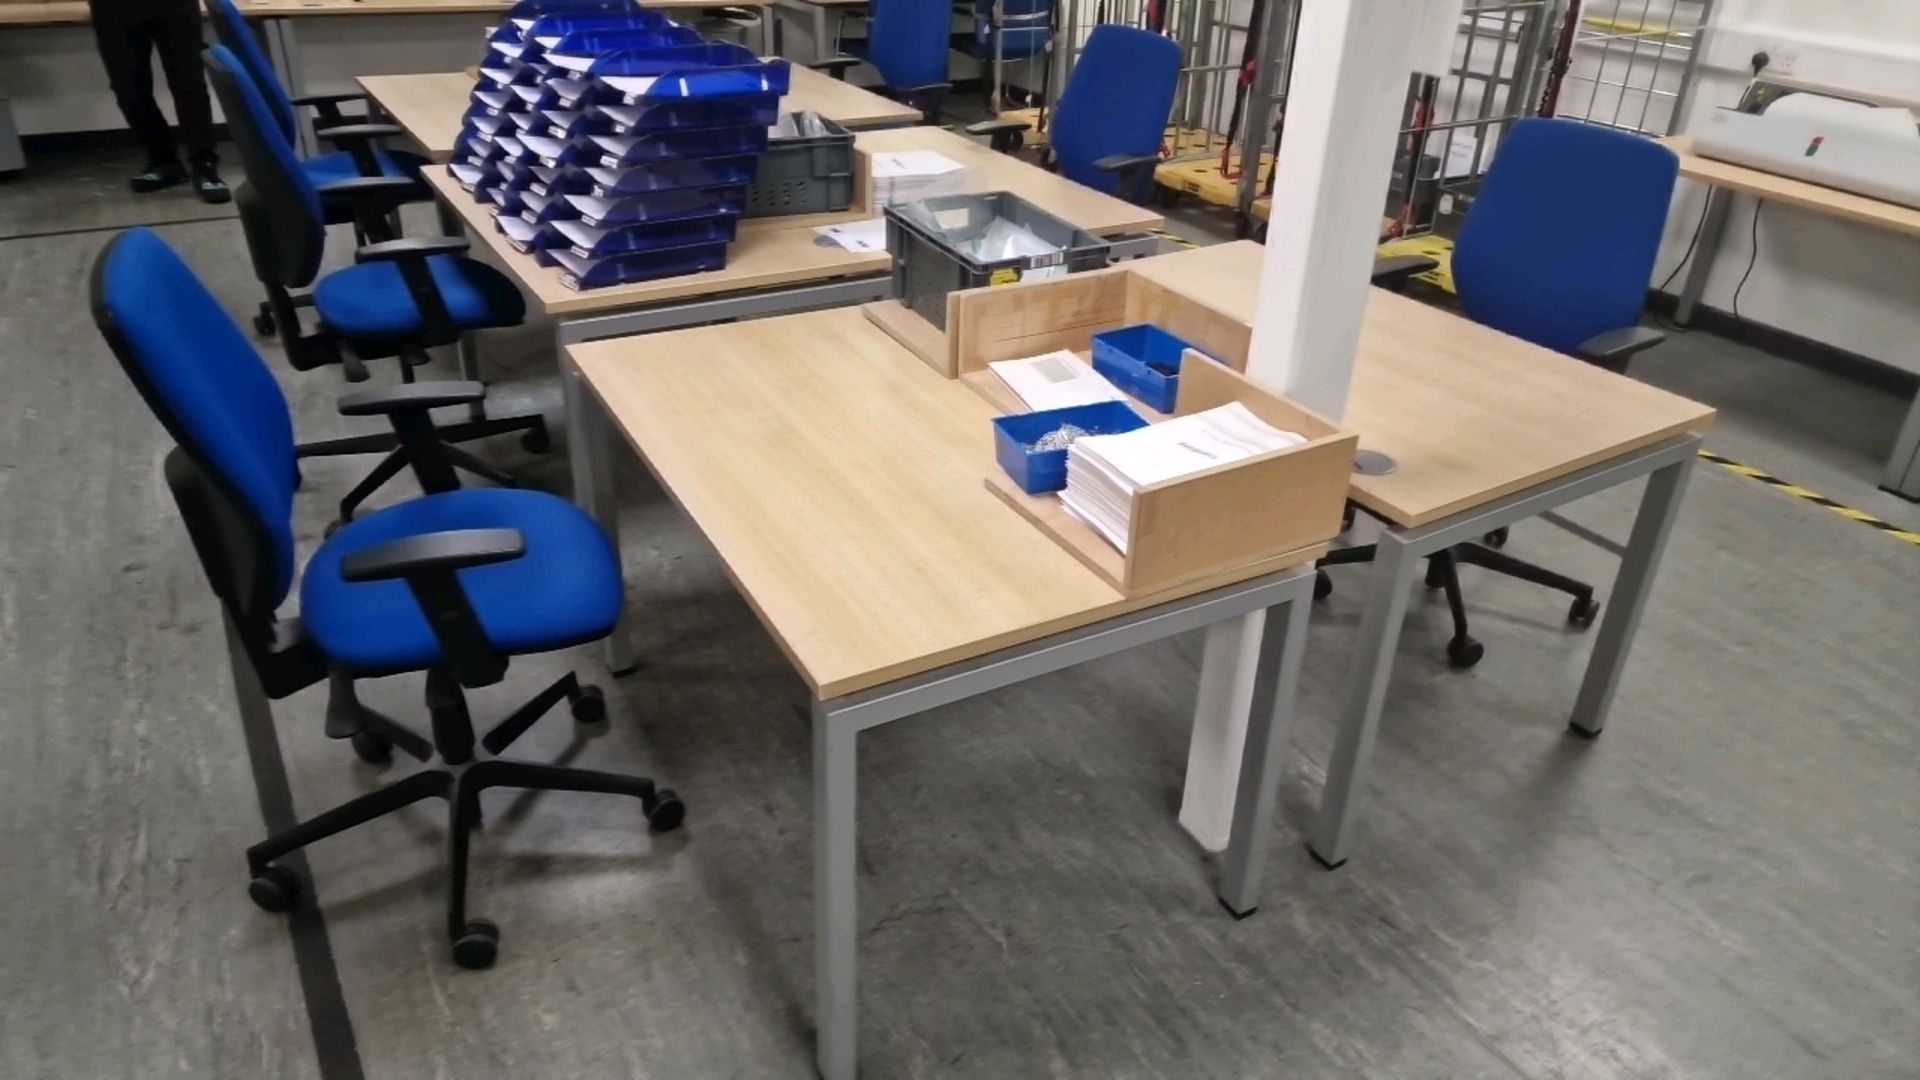 Bank Of 6 Desks & 6 Office Chairs - Image 2 of 4